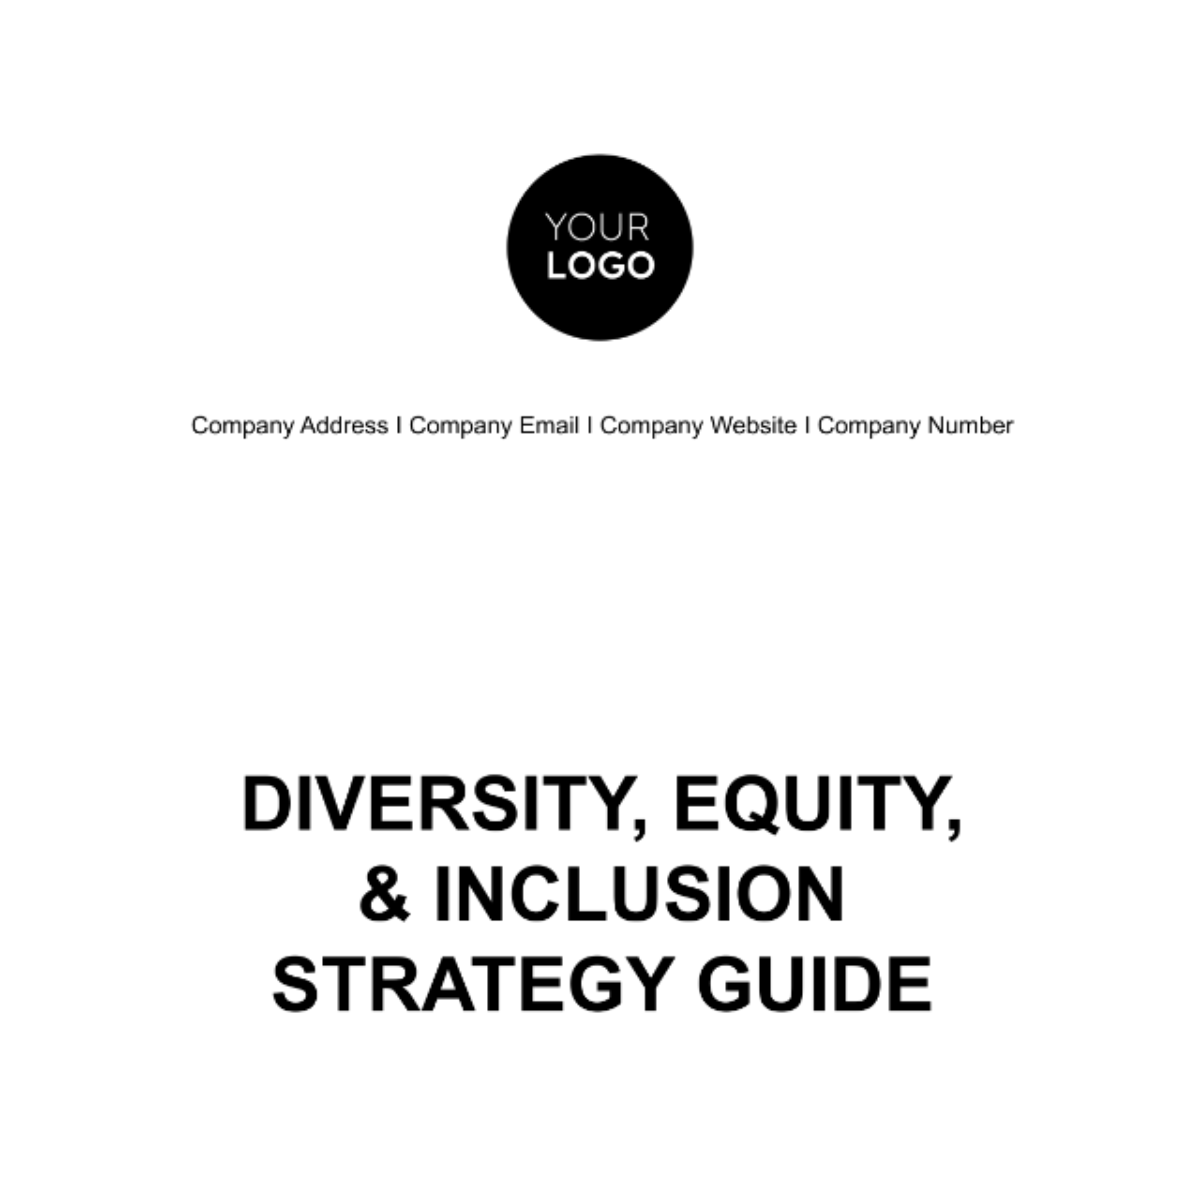 Free Diversity, Equity, & Inclusion Strategy Guide HR Template